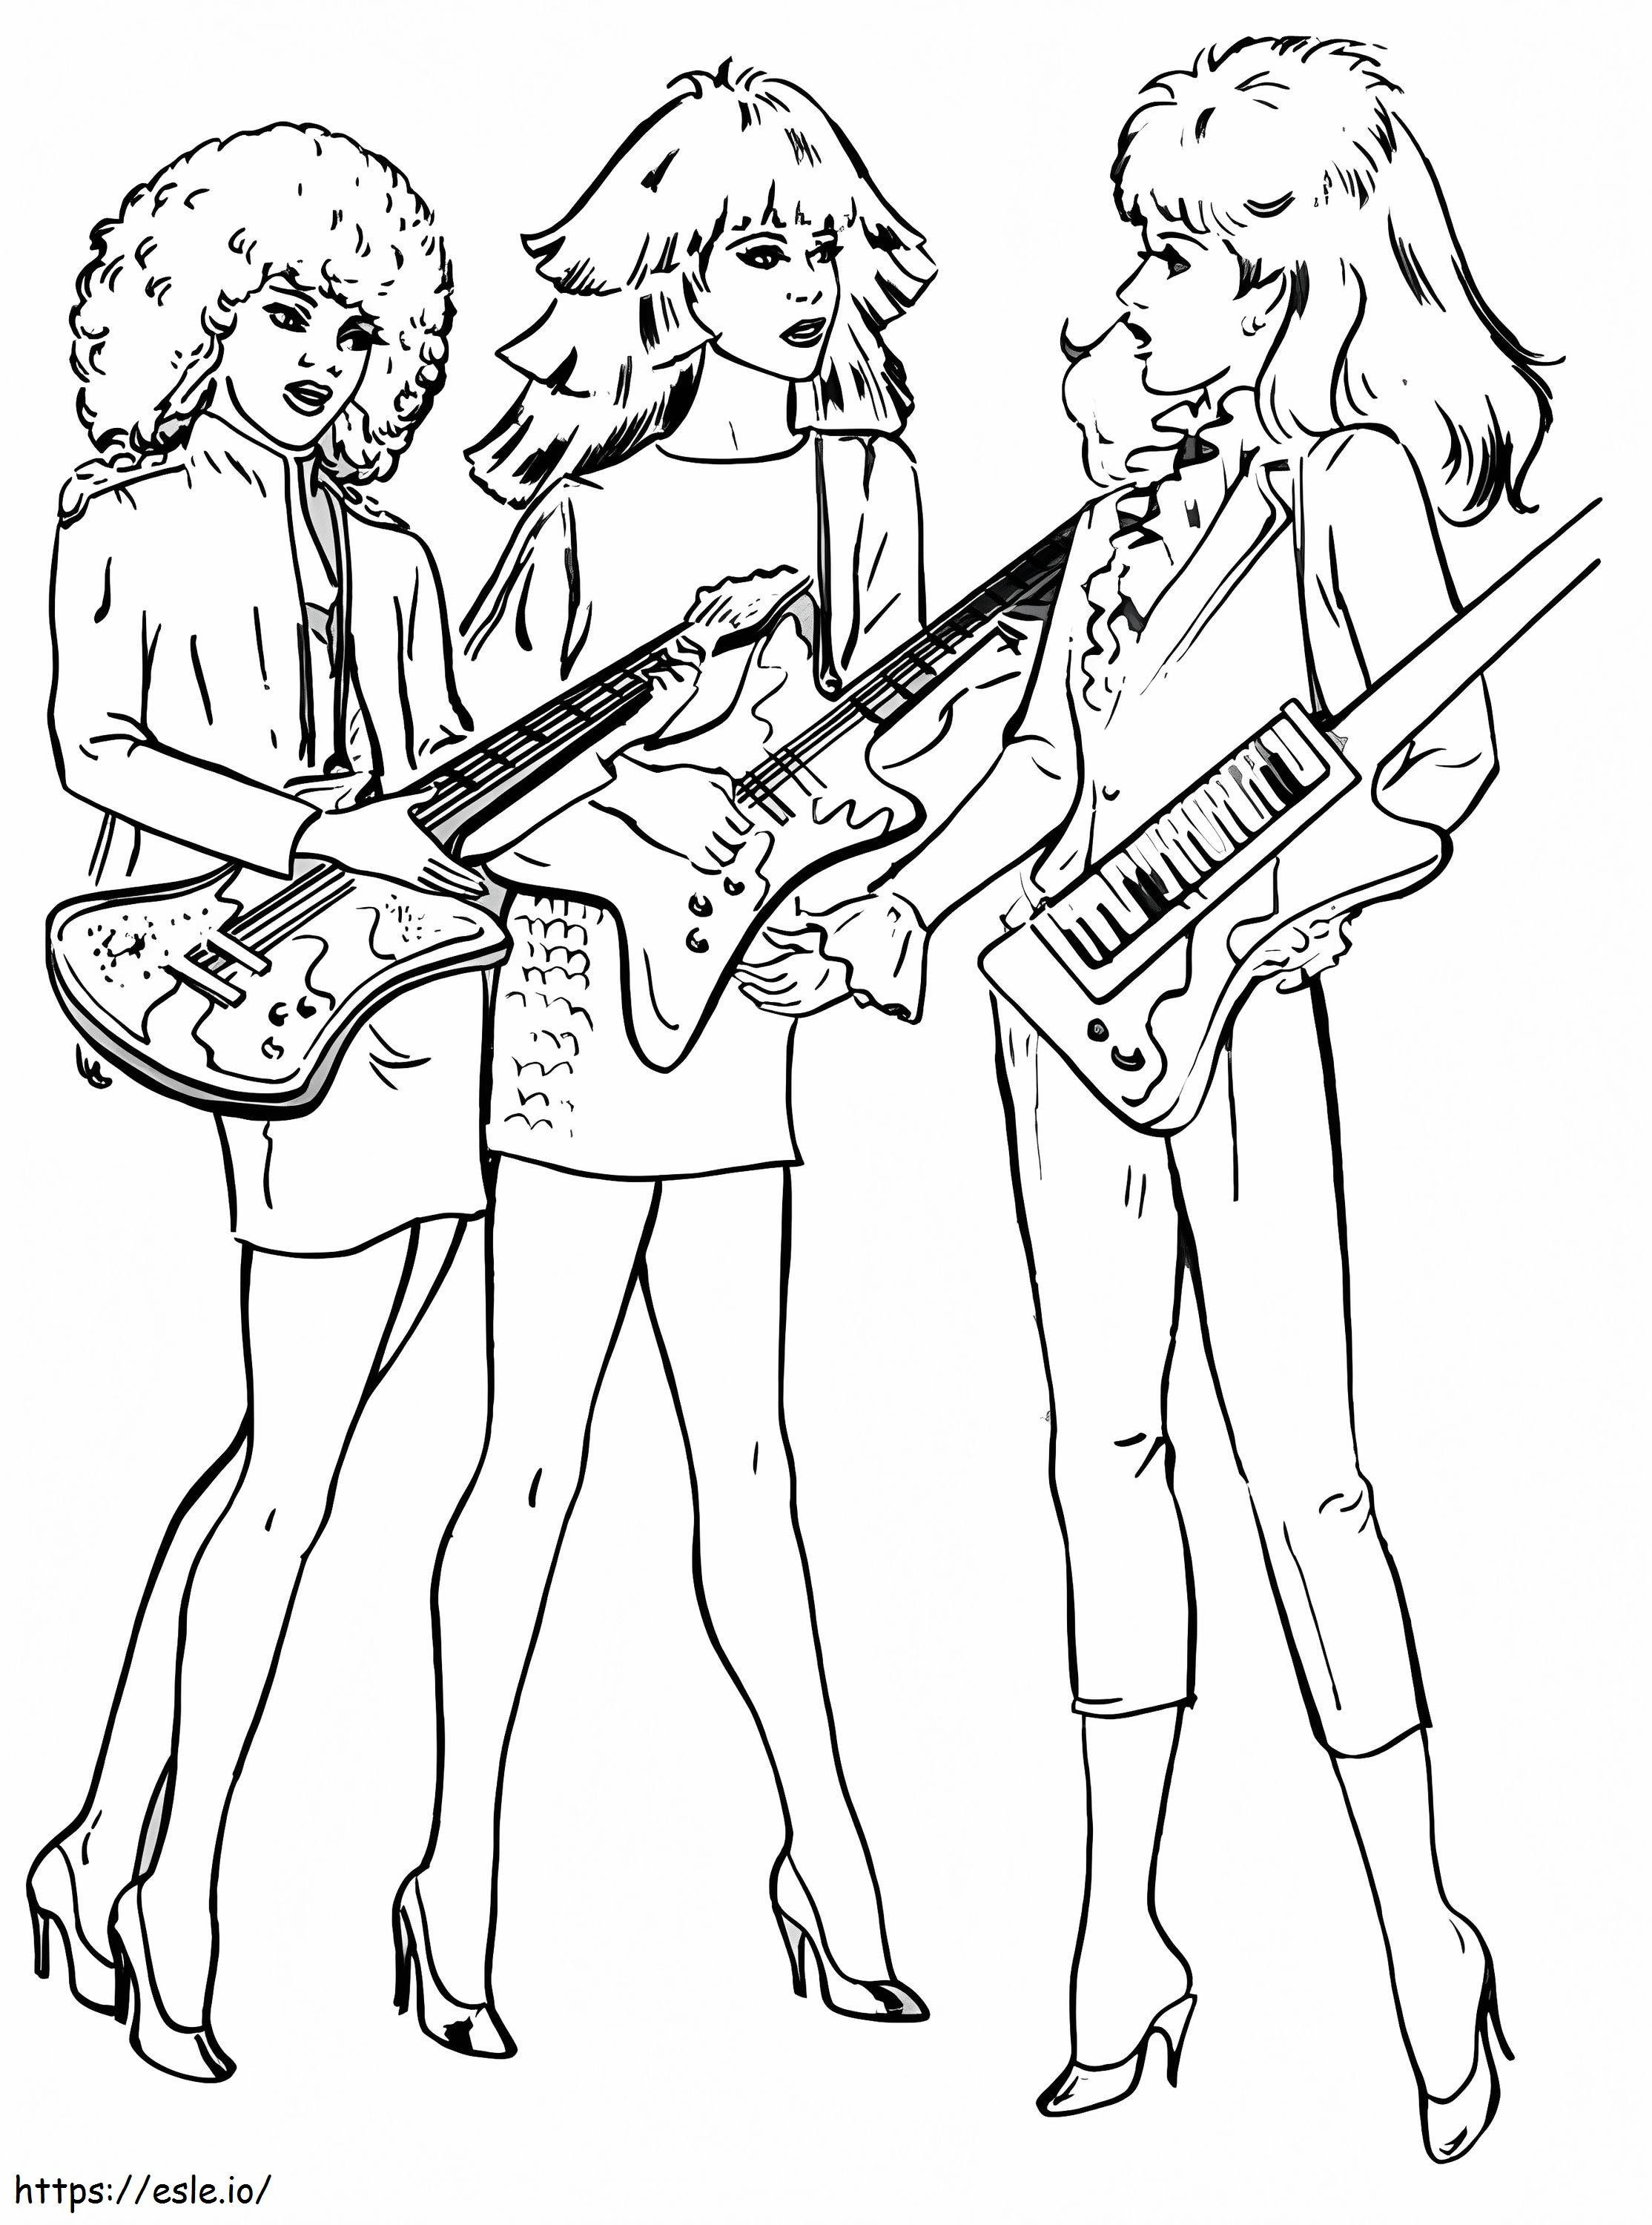 Jem And The Holograms 12 coloring page